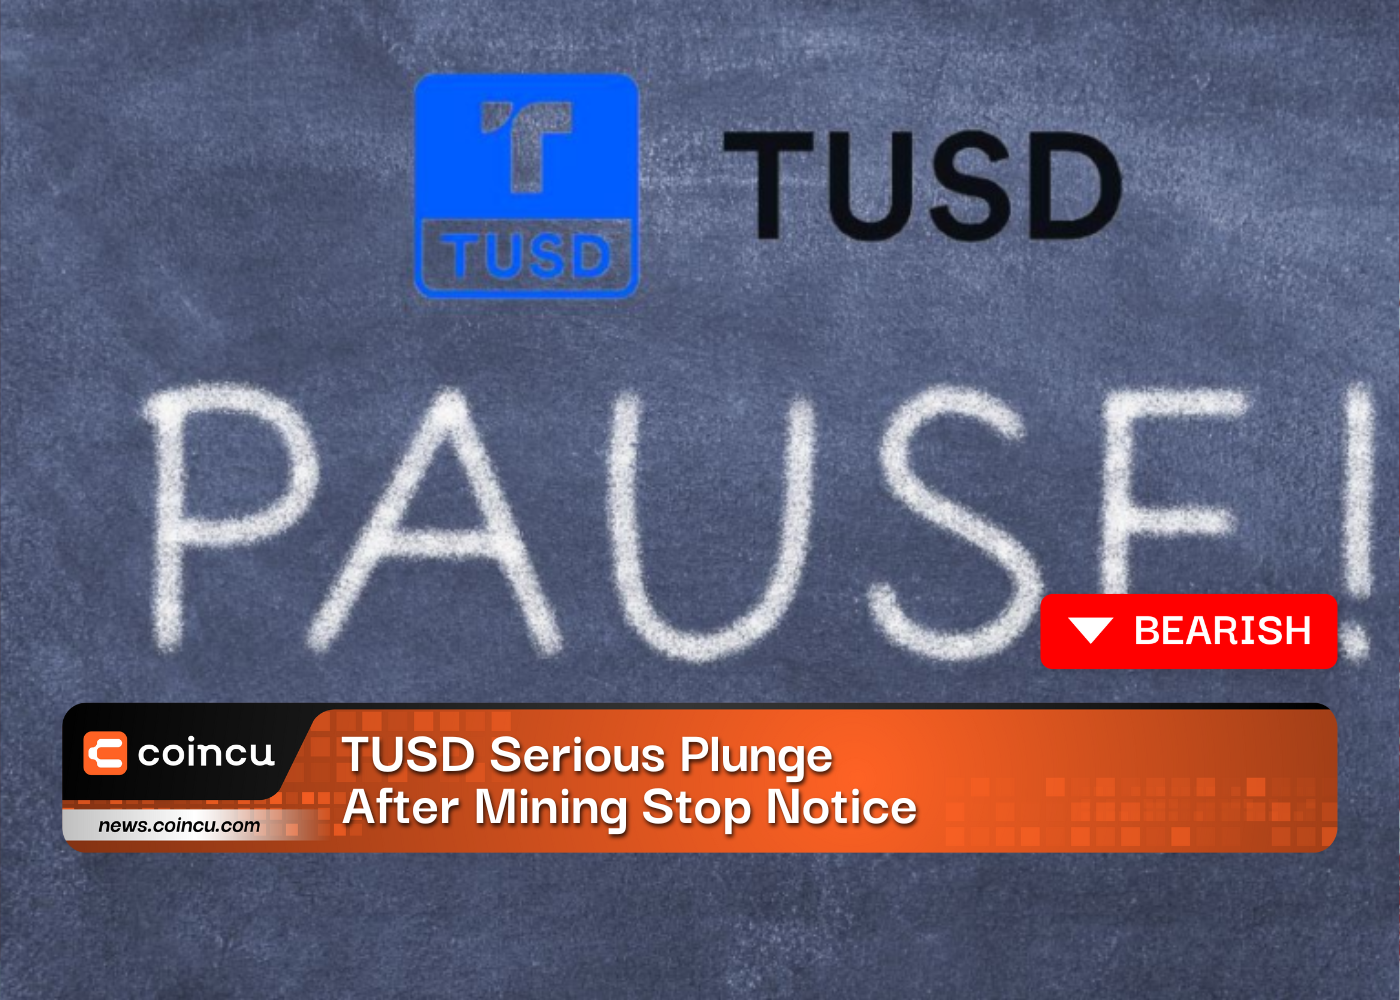 TUSD Serious Plunge After Mining Stop Notice